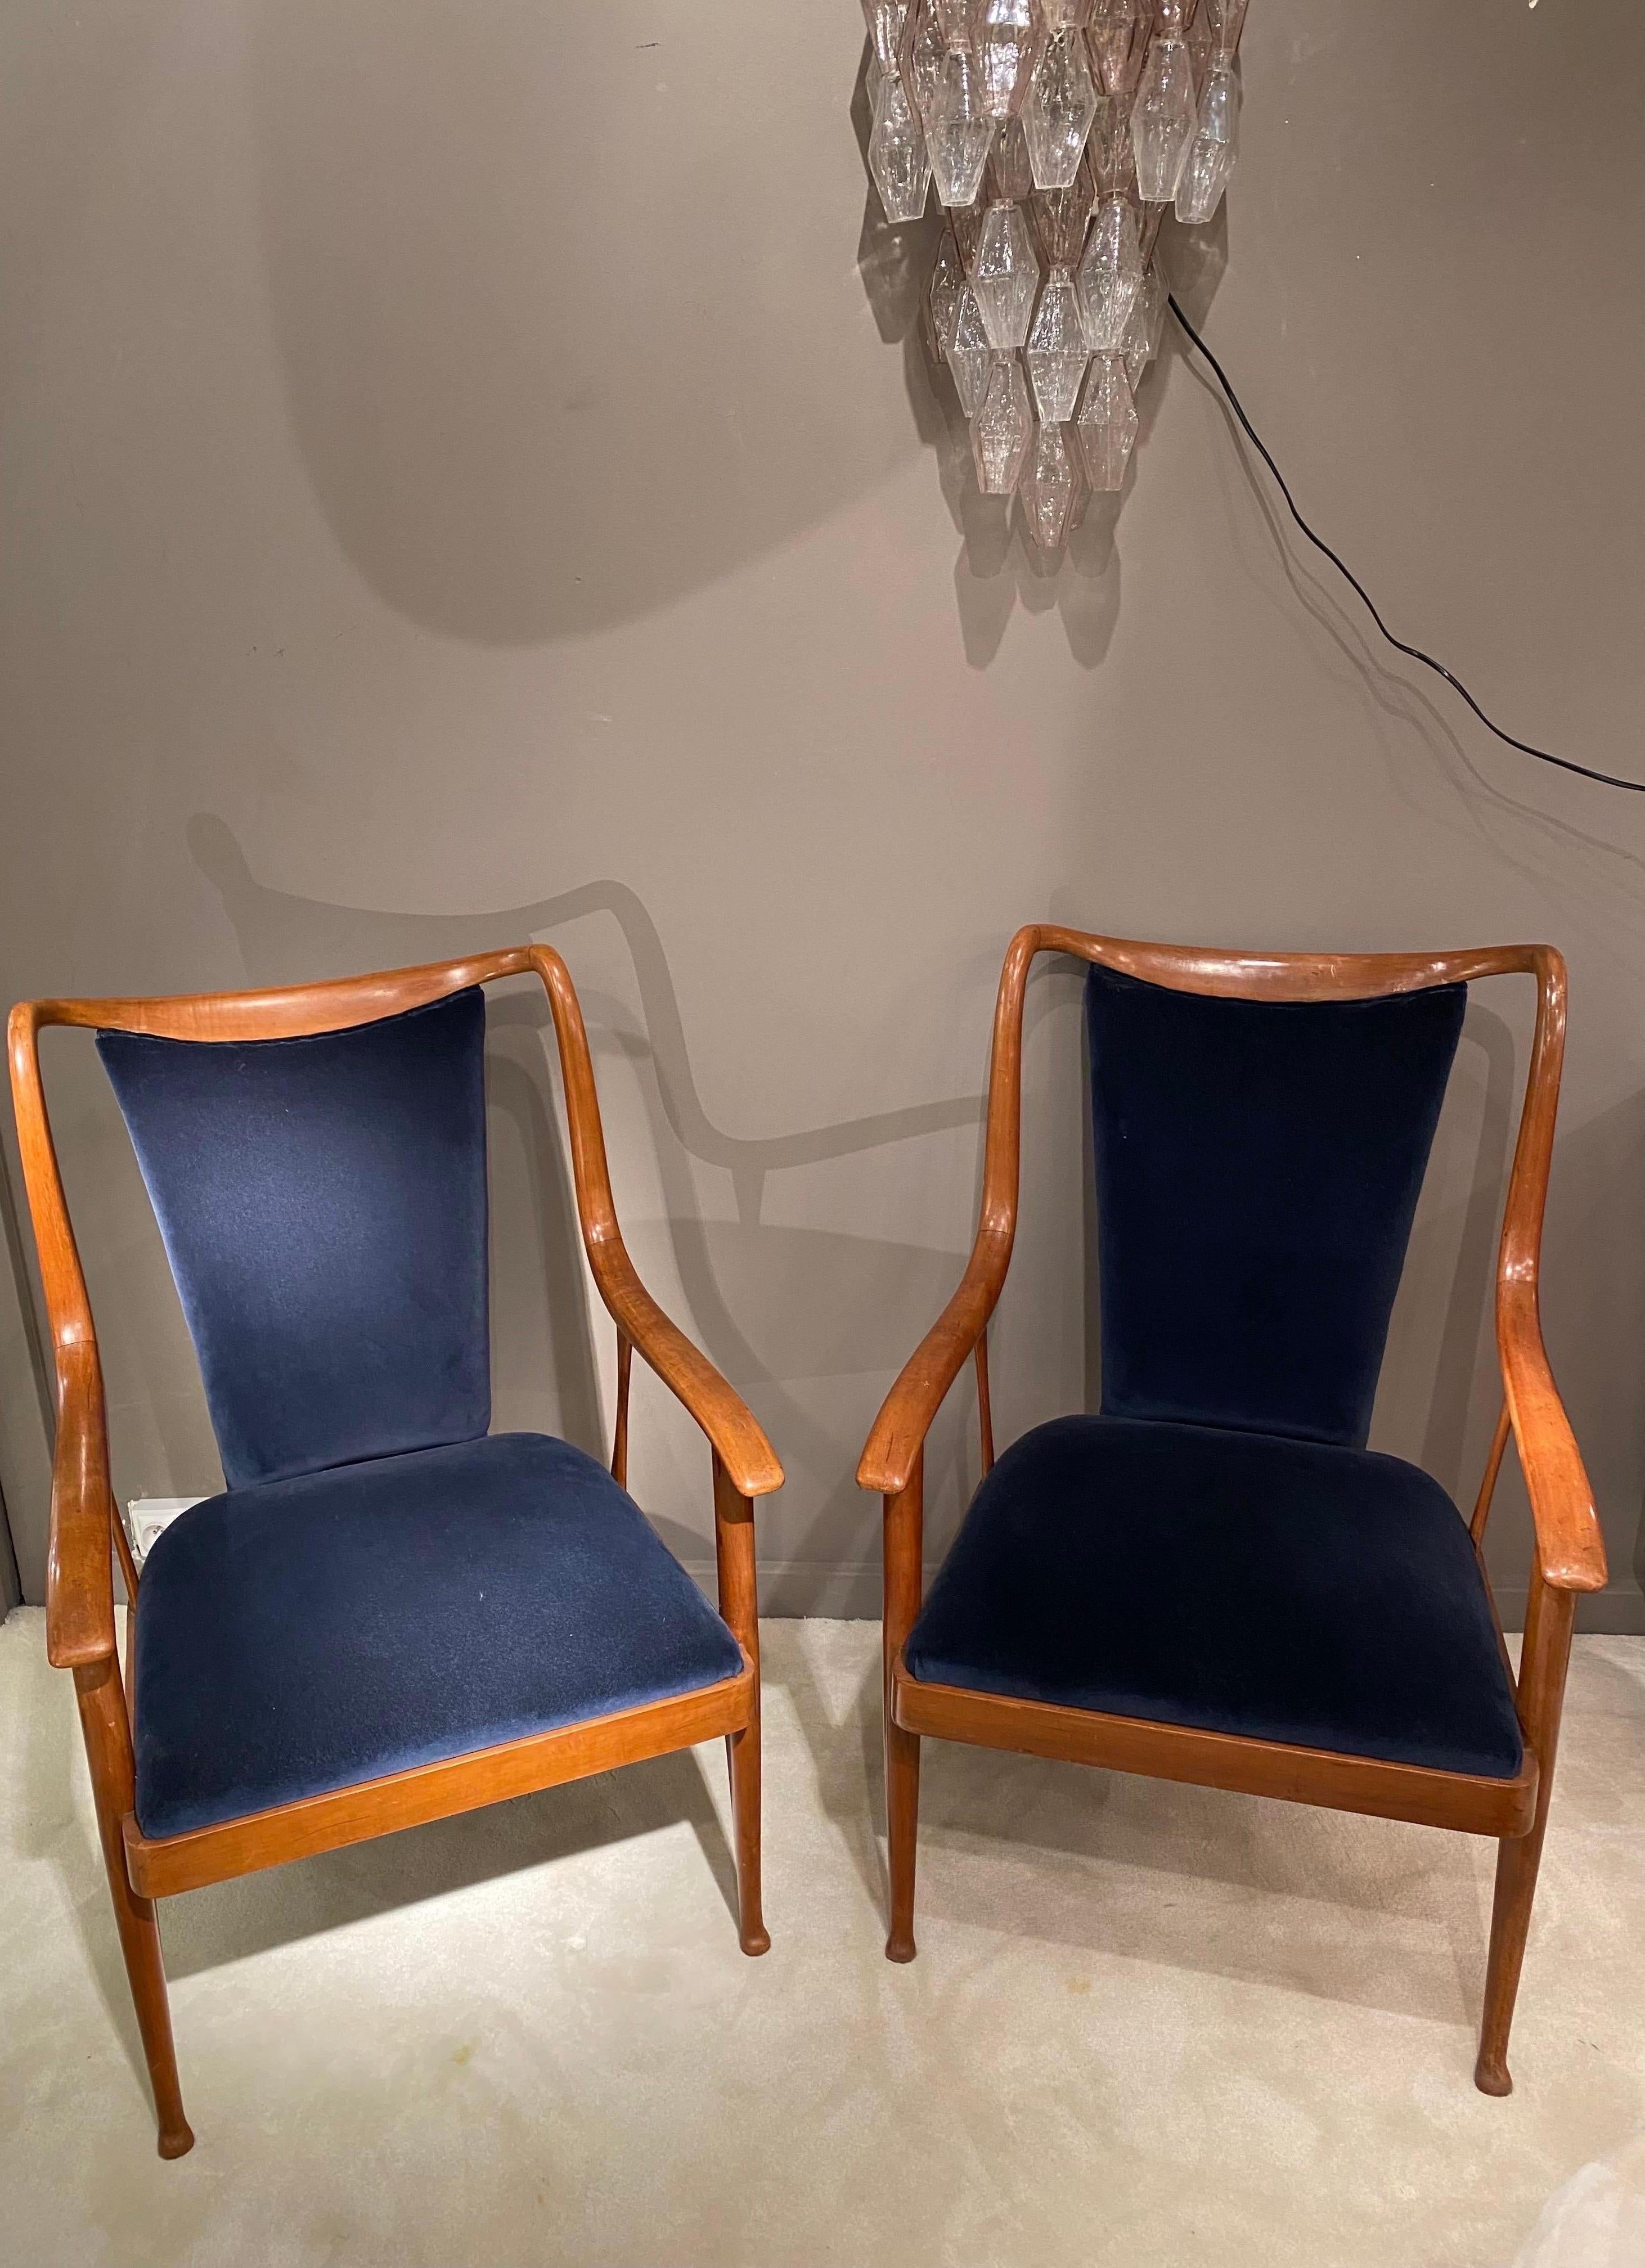 Elegant pair of armchairs by Paolo Buffa made in Italy in the 1950s. The languid and delicate structure is in walnut. Both armchairs have been reupholstered in a chic blue shimmering velvet. Look at all the details from the delicately carved base to